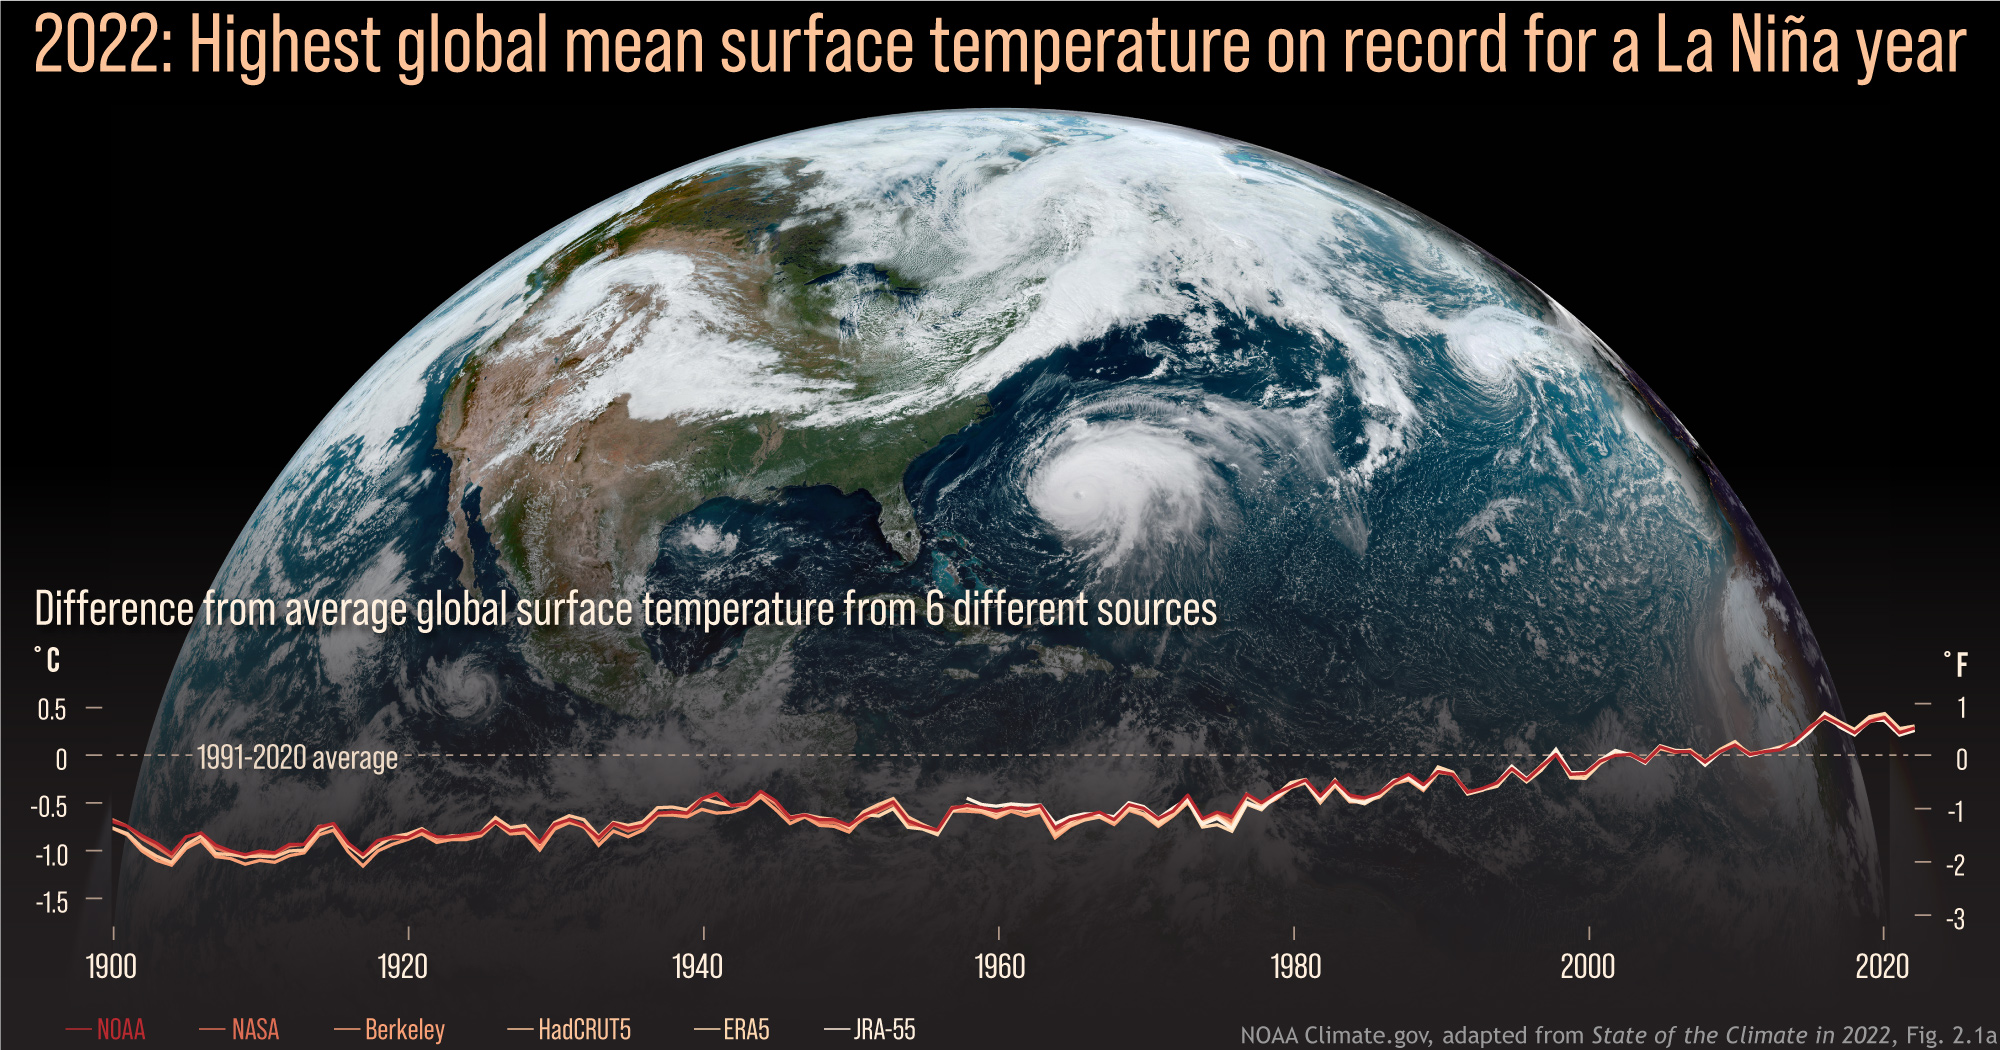 Graphs of yearly global surface temperature compared to the 1991-2020 average for each year from 1900 to 2022, from 6 data records, overlaid on a GOES-16 satellite image from September 22, 2022. NOAA Climate.gov image, adapted from Figure 2.1a in State of the Climate 2022.